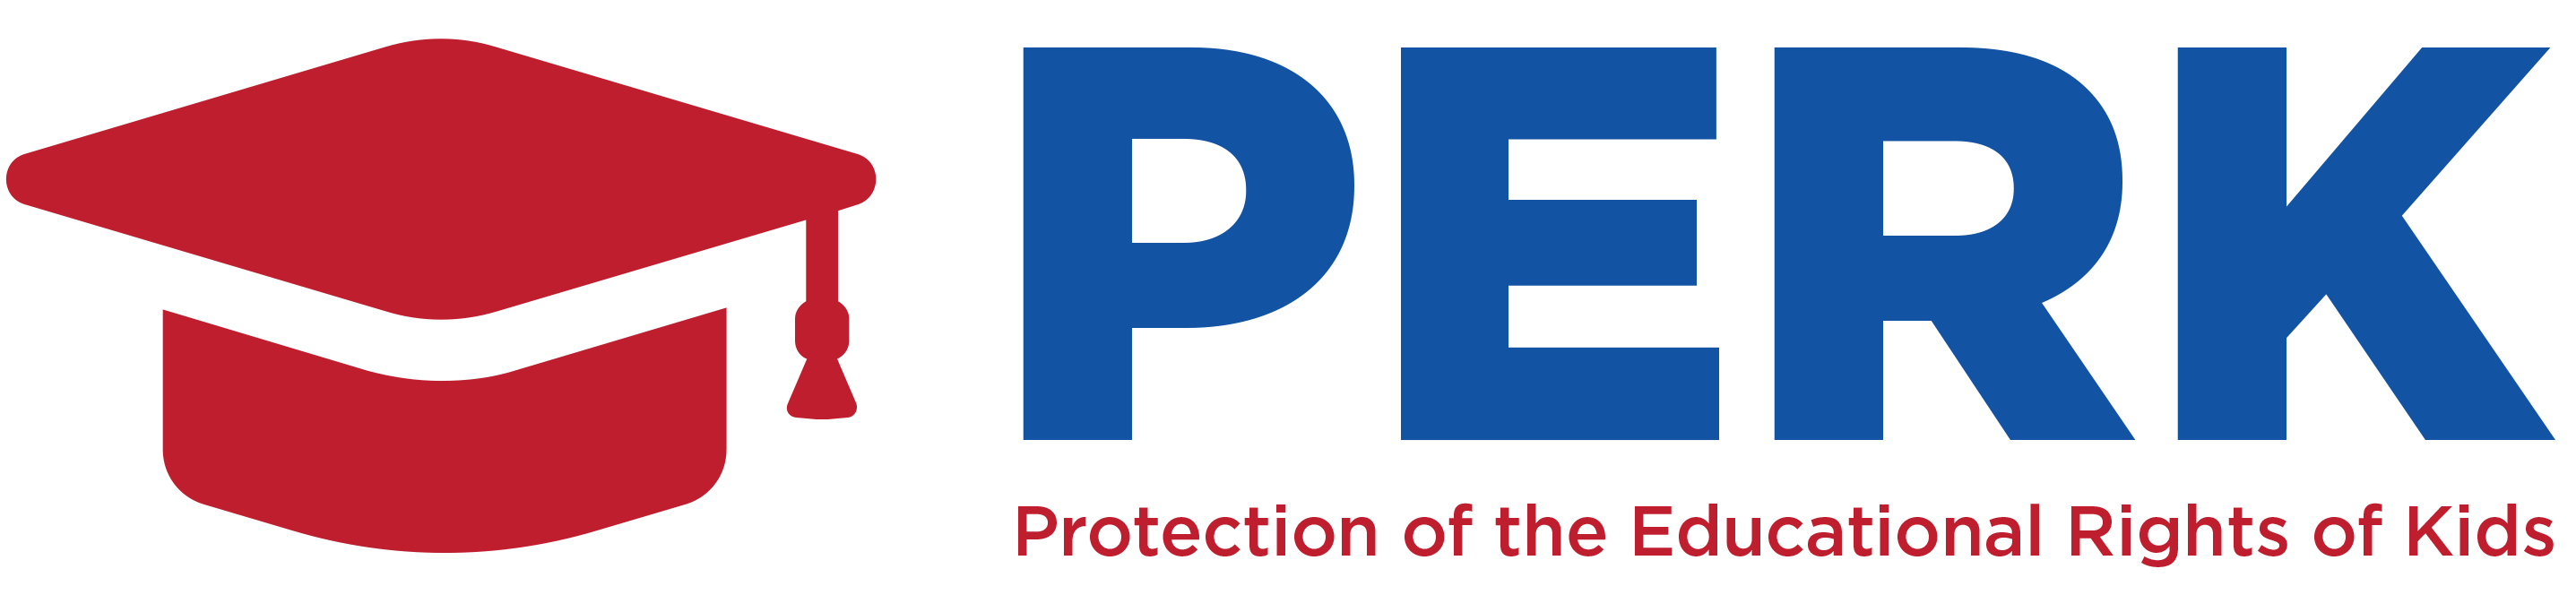 Protection of the Educational Rights of Kids logo